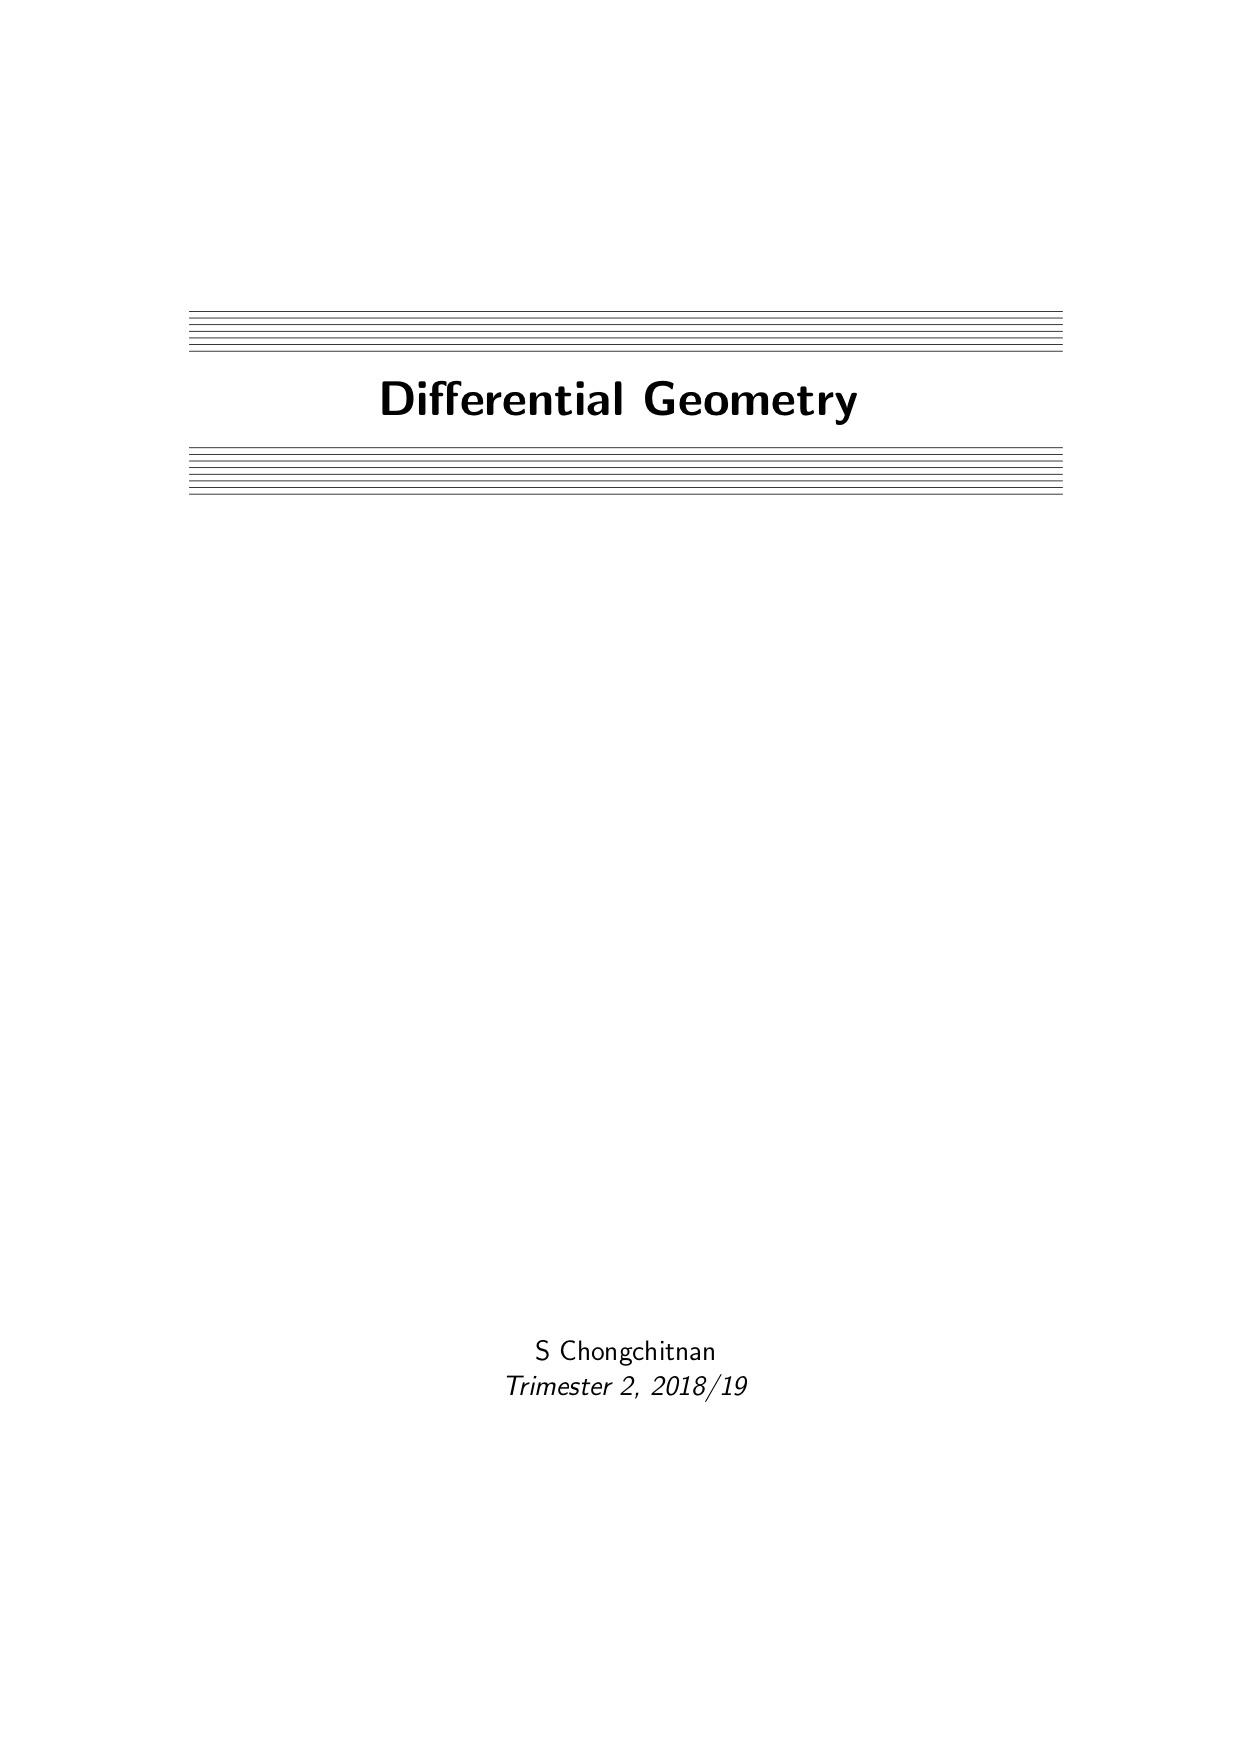 Differential Geometry 18/19